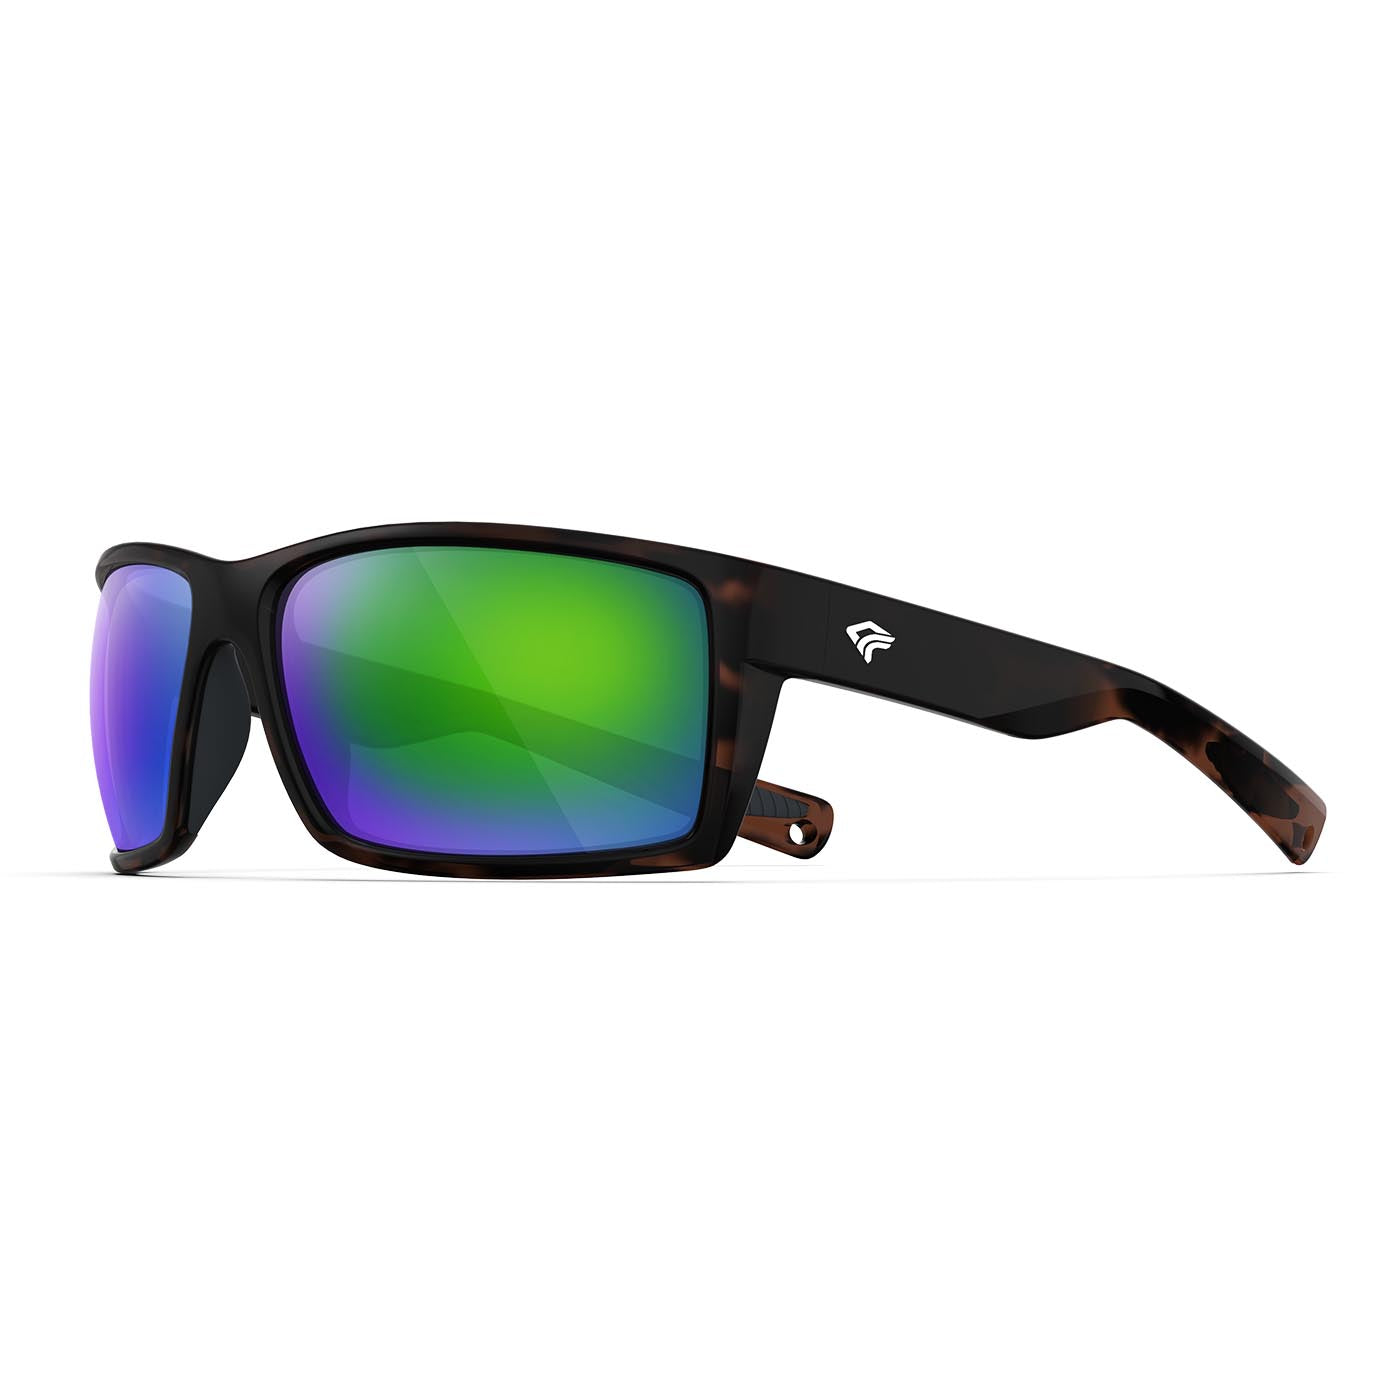 Fantastic Polarized Sports Sunglasses for Men and Women With Lifetime  Warranty - Perfect for Sports, Fishing, Boating, Beach, Golf & Driving -  Tortoise Frame & Green Jade Lens